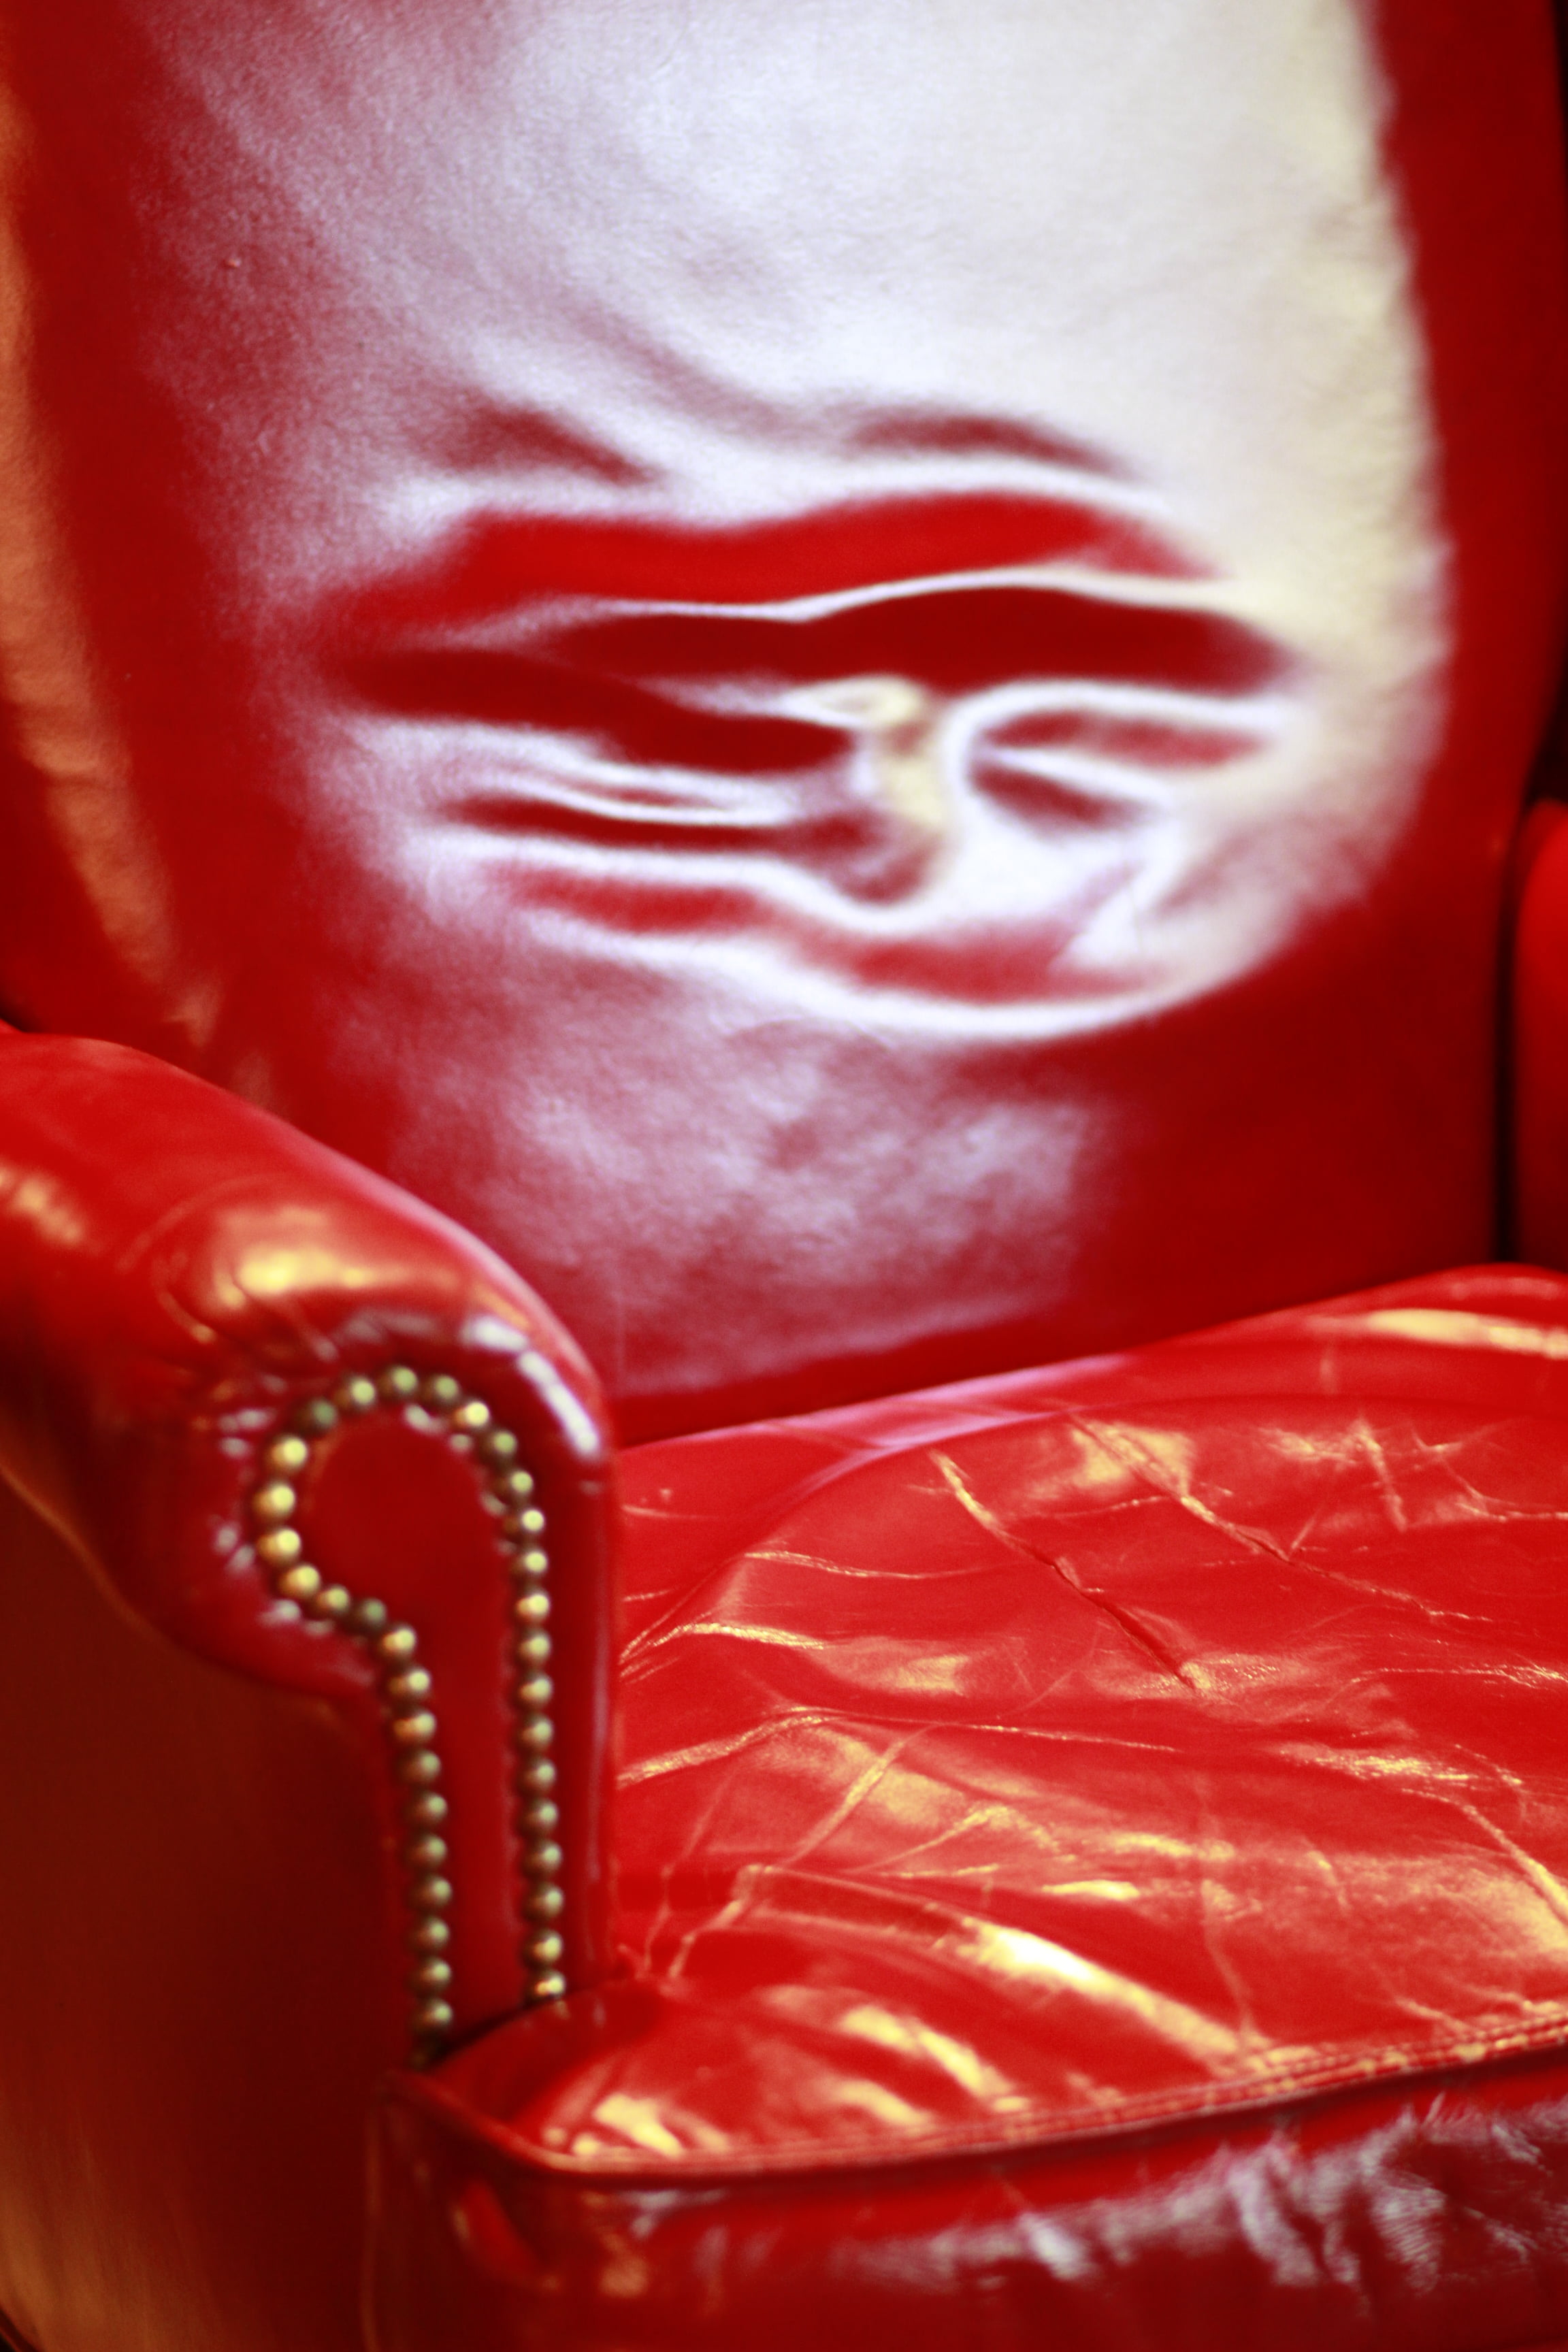 photo of red leather chair on hrexaminer.com article February 17, 2015 from Heather Bussing on sexual harrassment